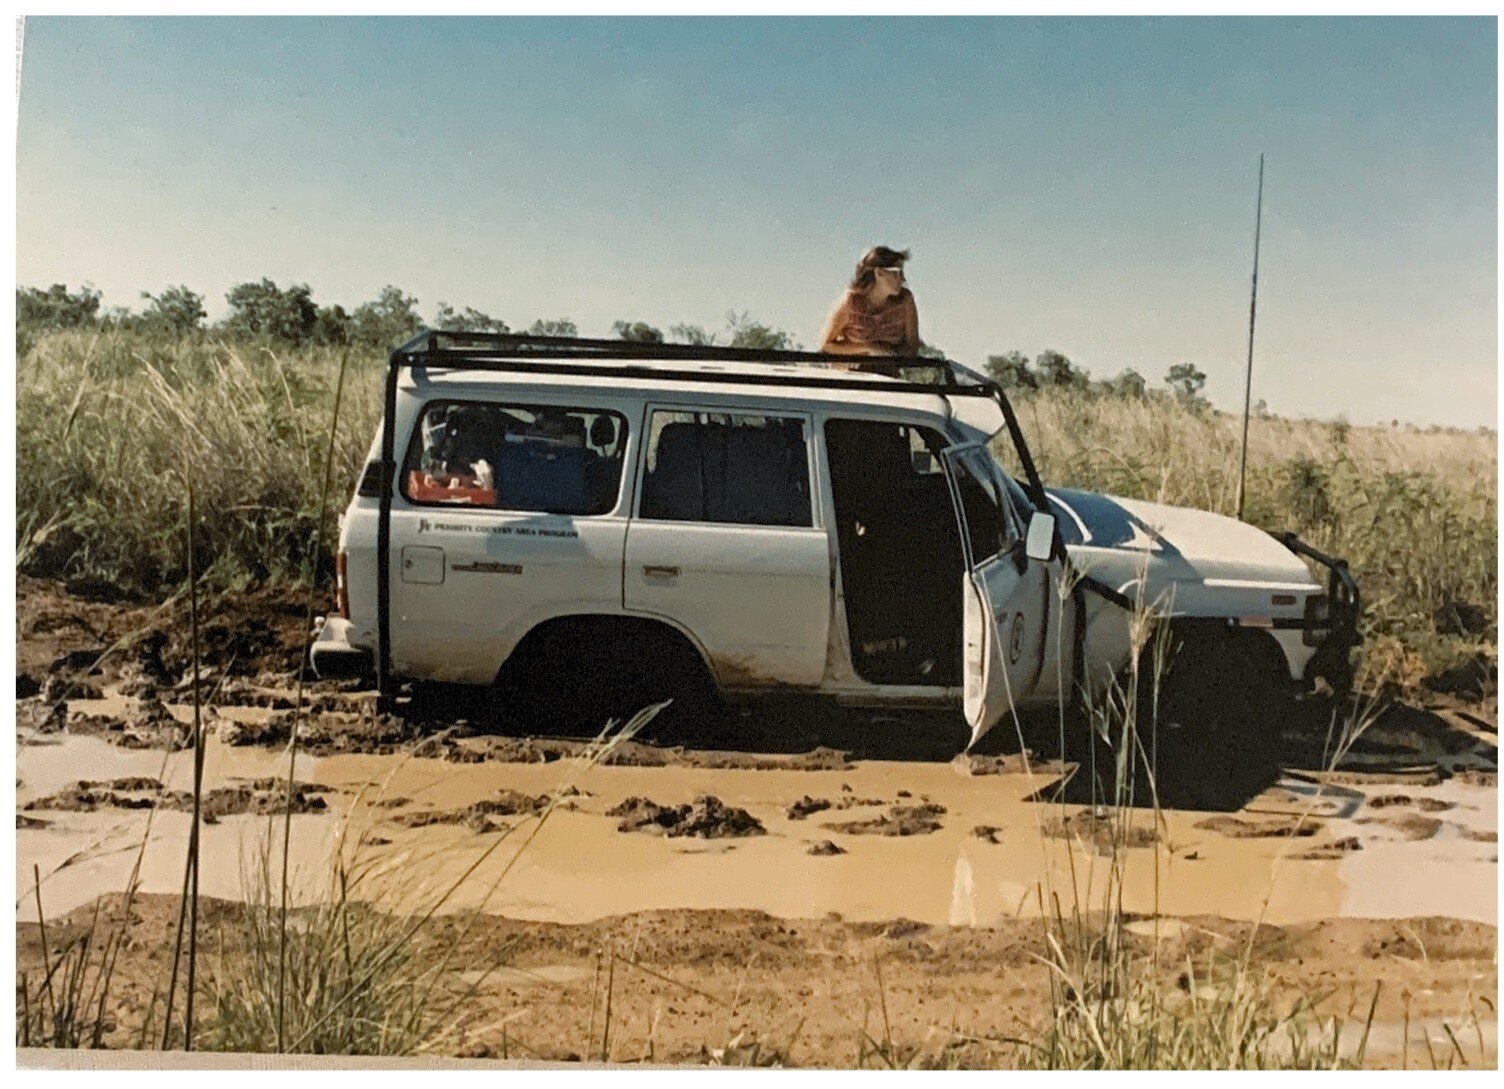 A woman leans out of a bogged car